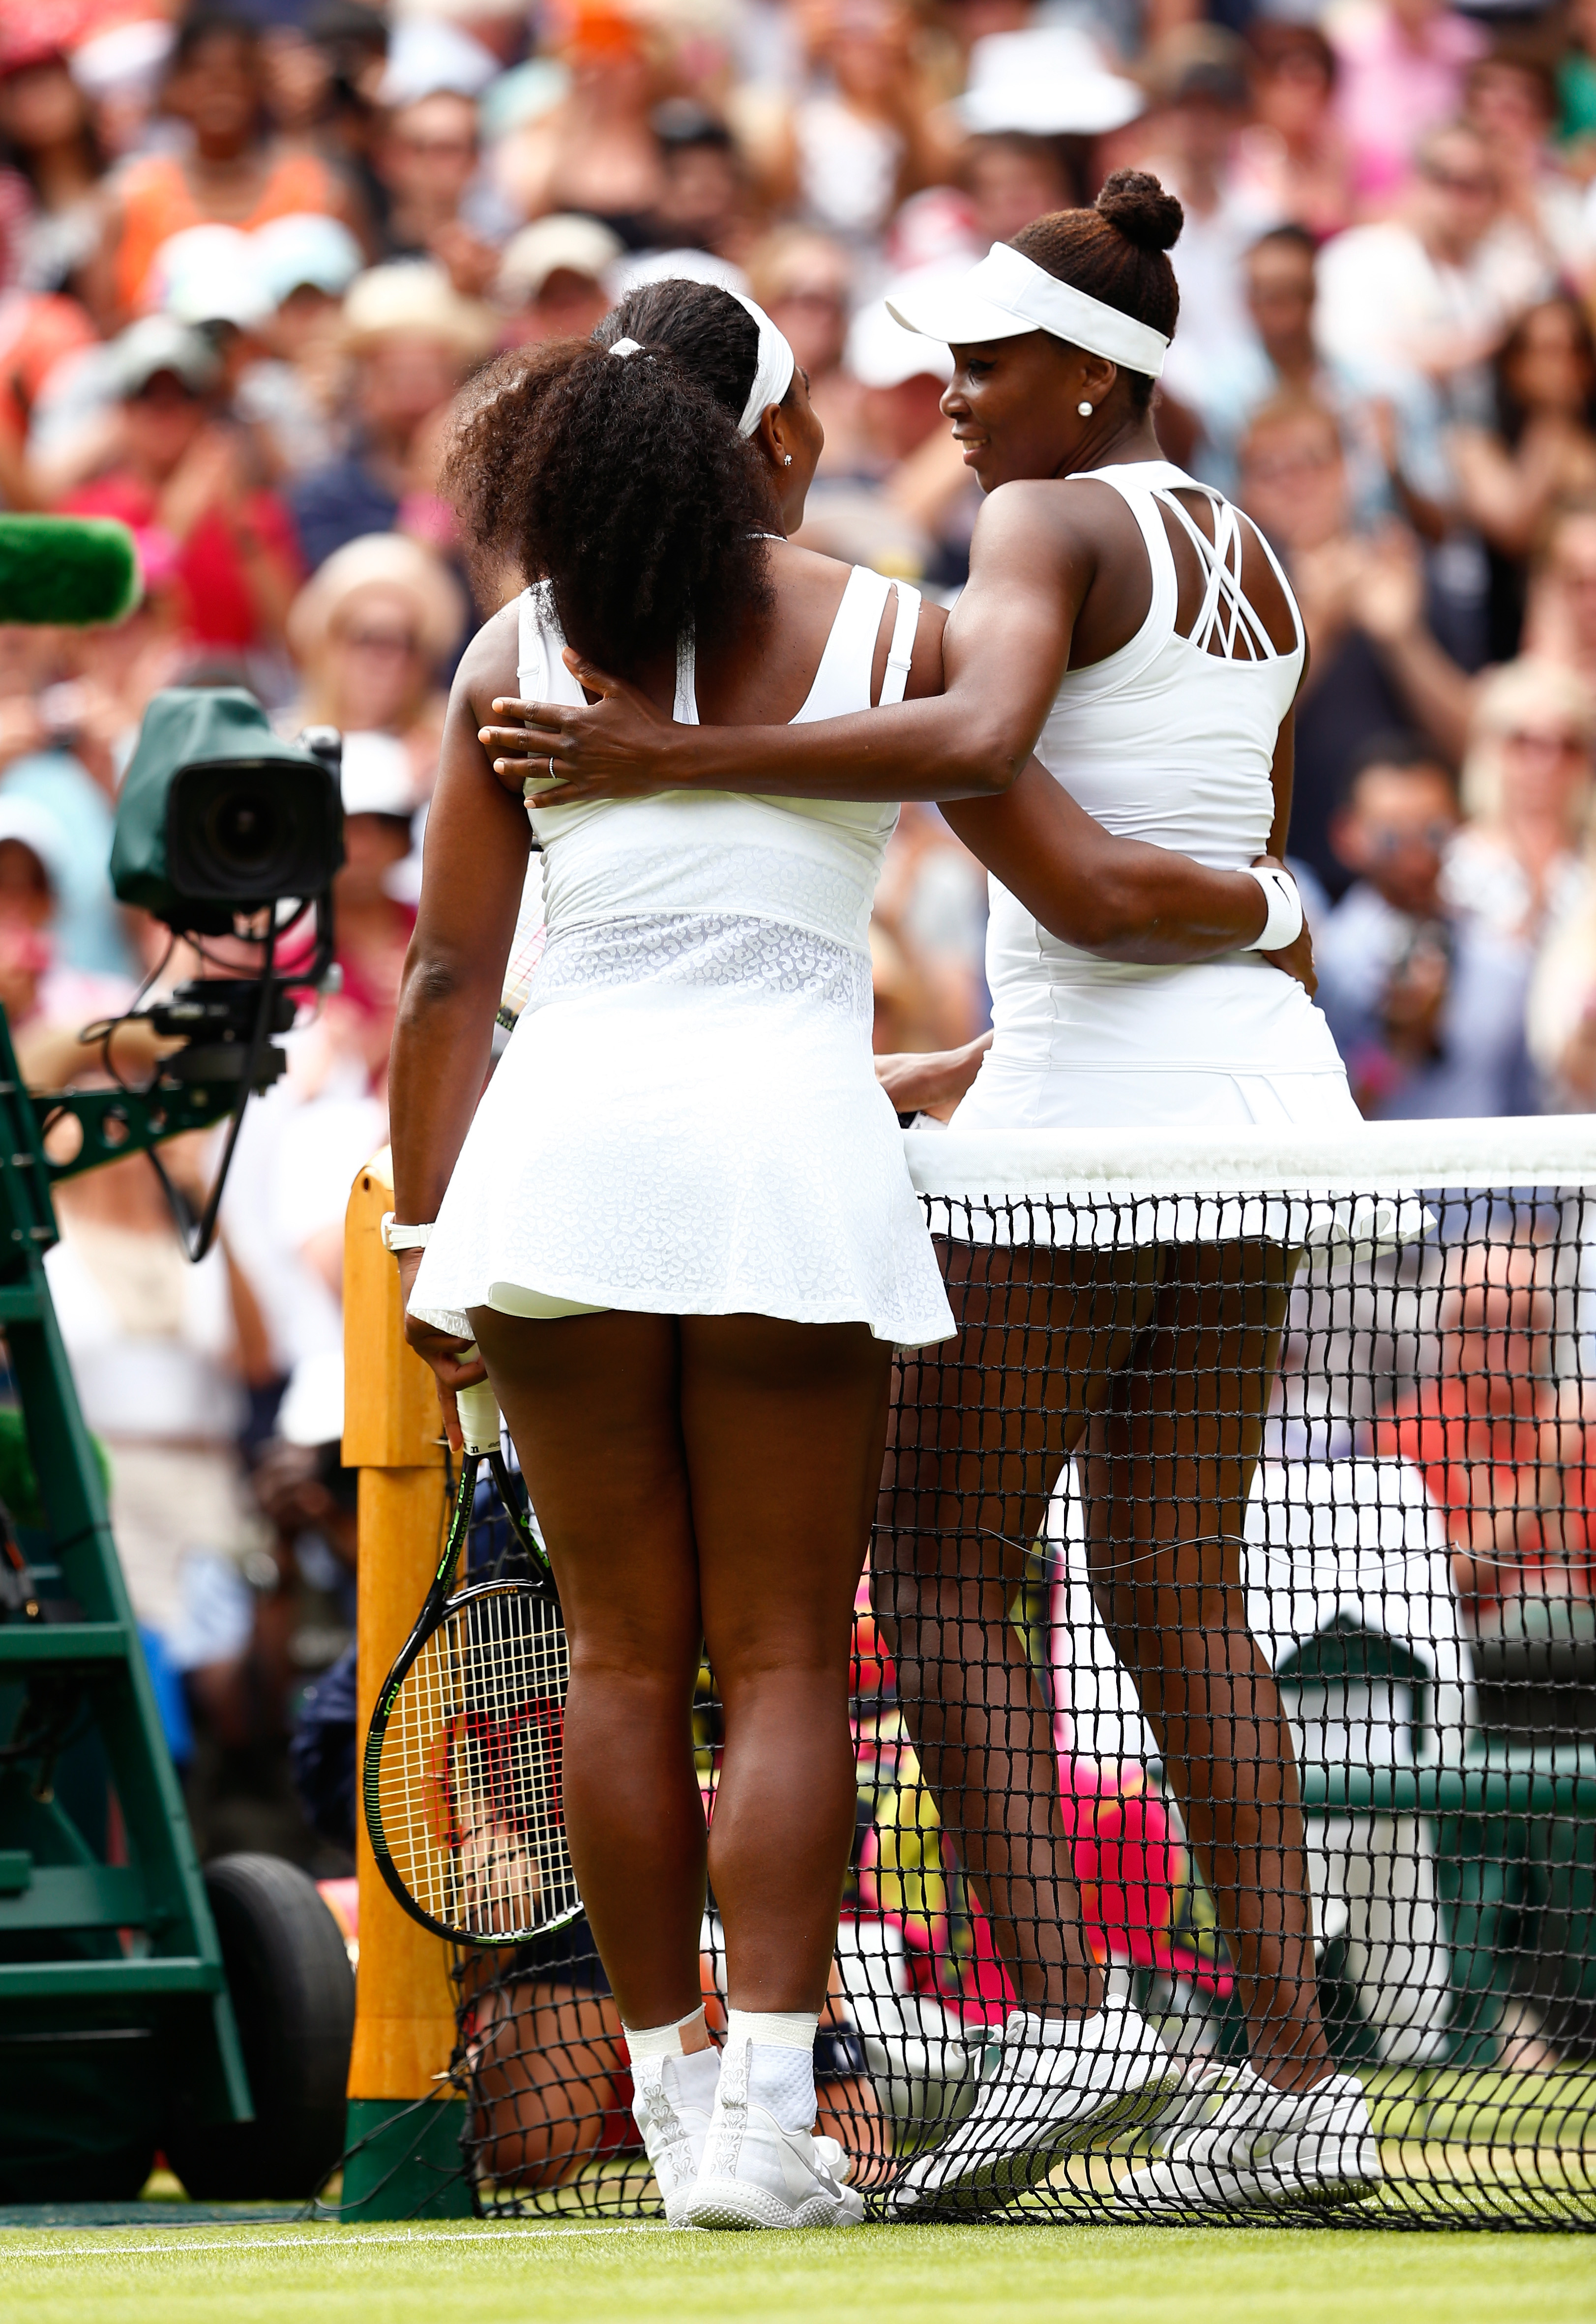 8 Lessons Every Woman Can Learn From Venus And Serena Williams3246 x 4728